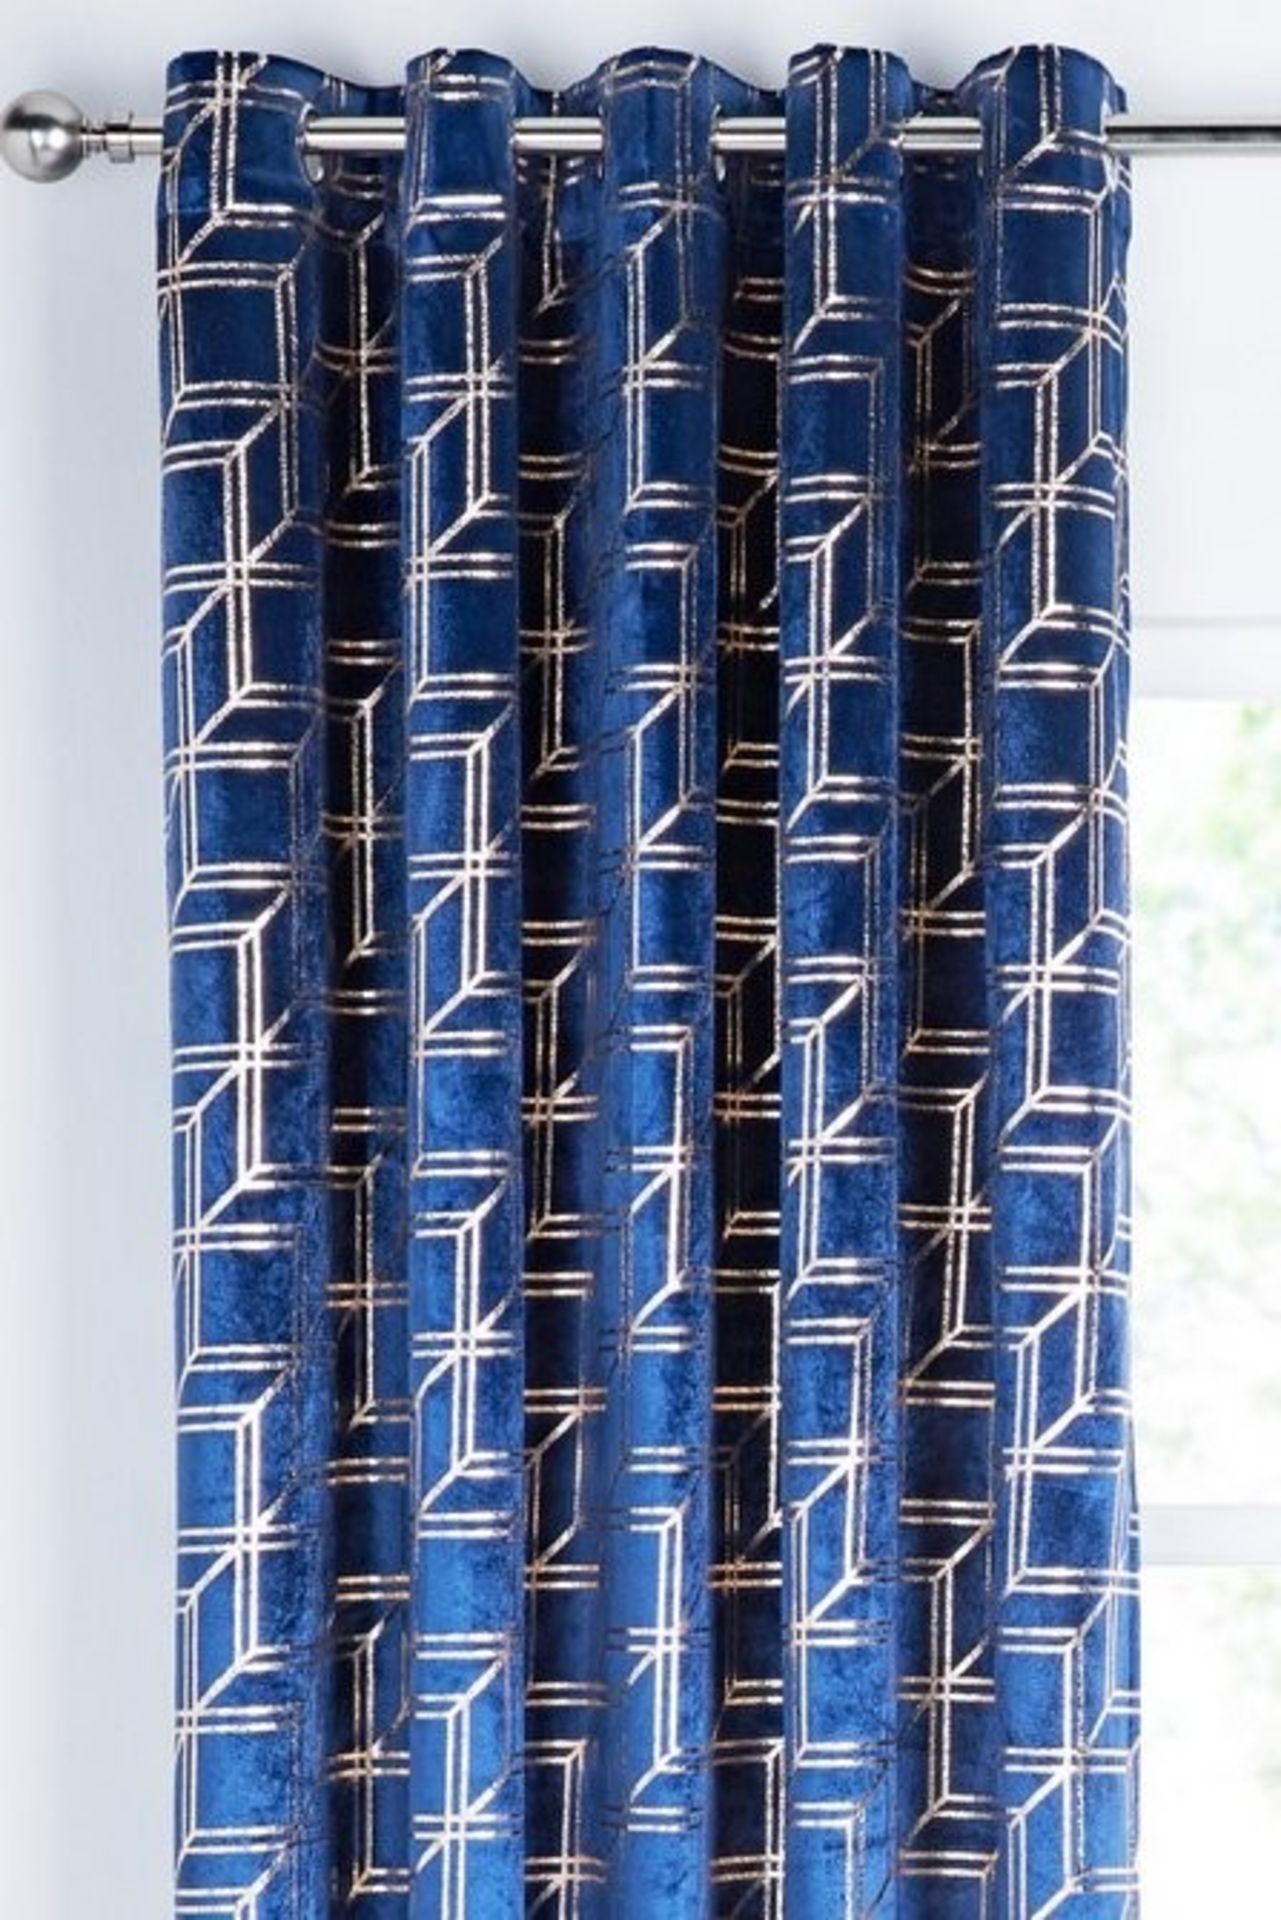 1 AS NEW BAGGED PAIR OF METALLIC CUBES EYELET CURTAINS IN BLUE / 46" X 54" (PUBLIC VIEWING